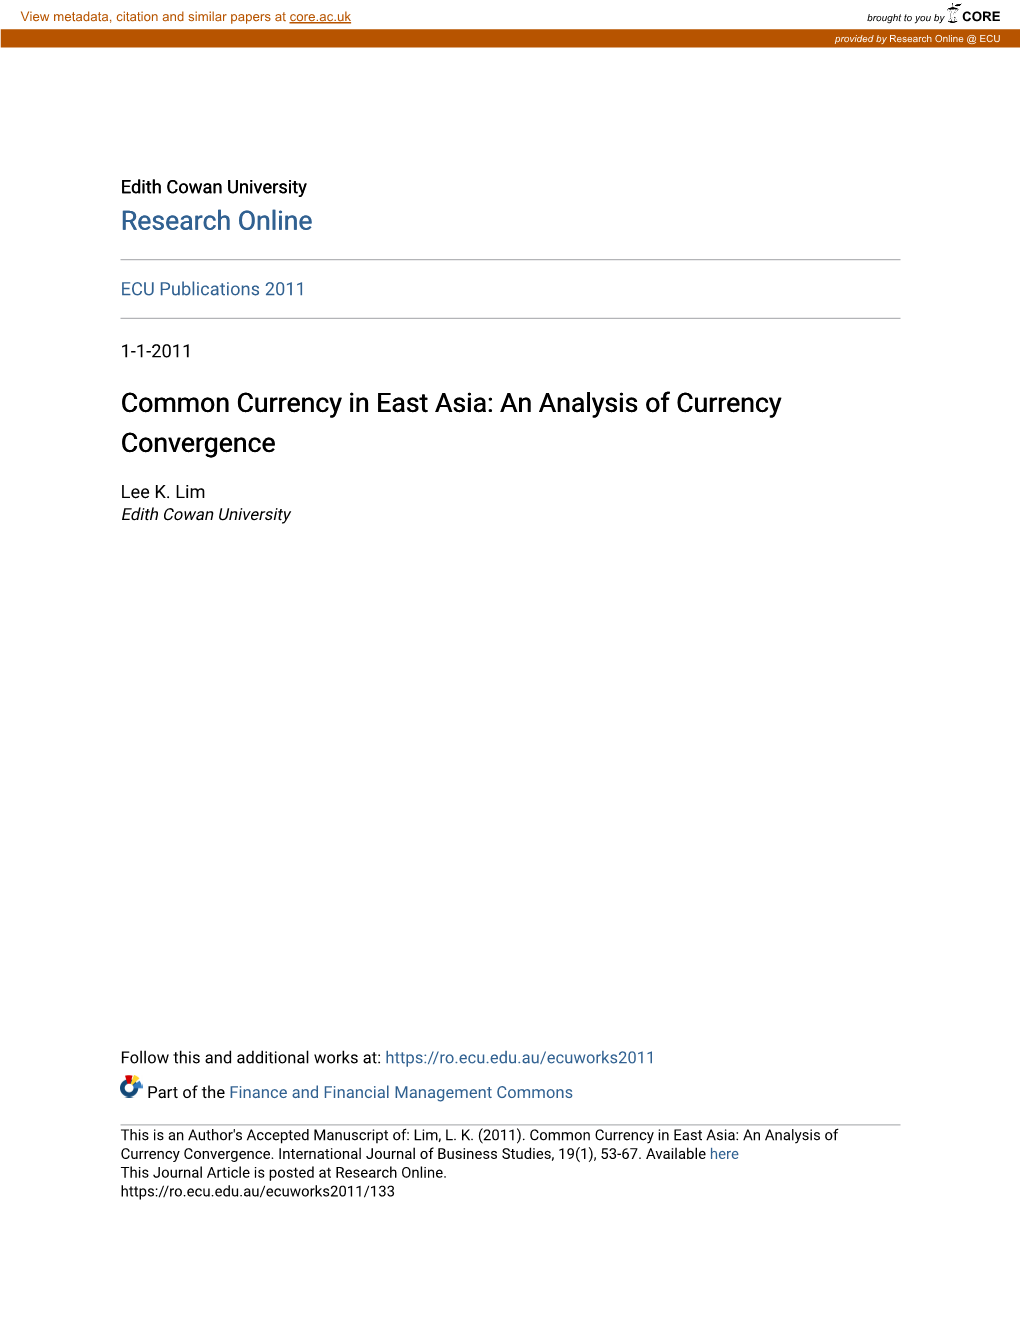 Common Currency in East Asia: an Analysis of Currency Convergence